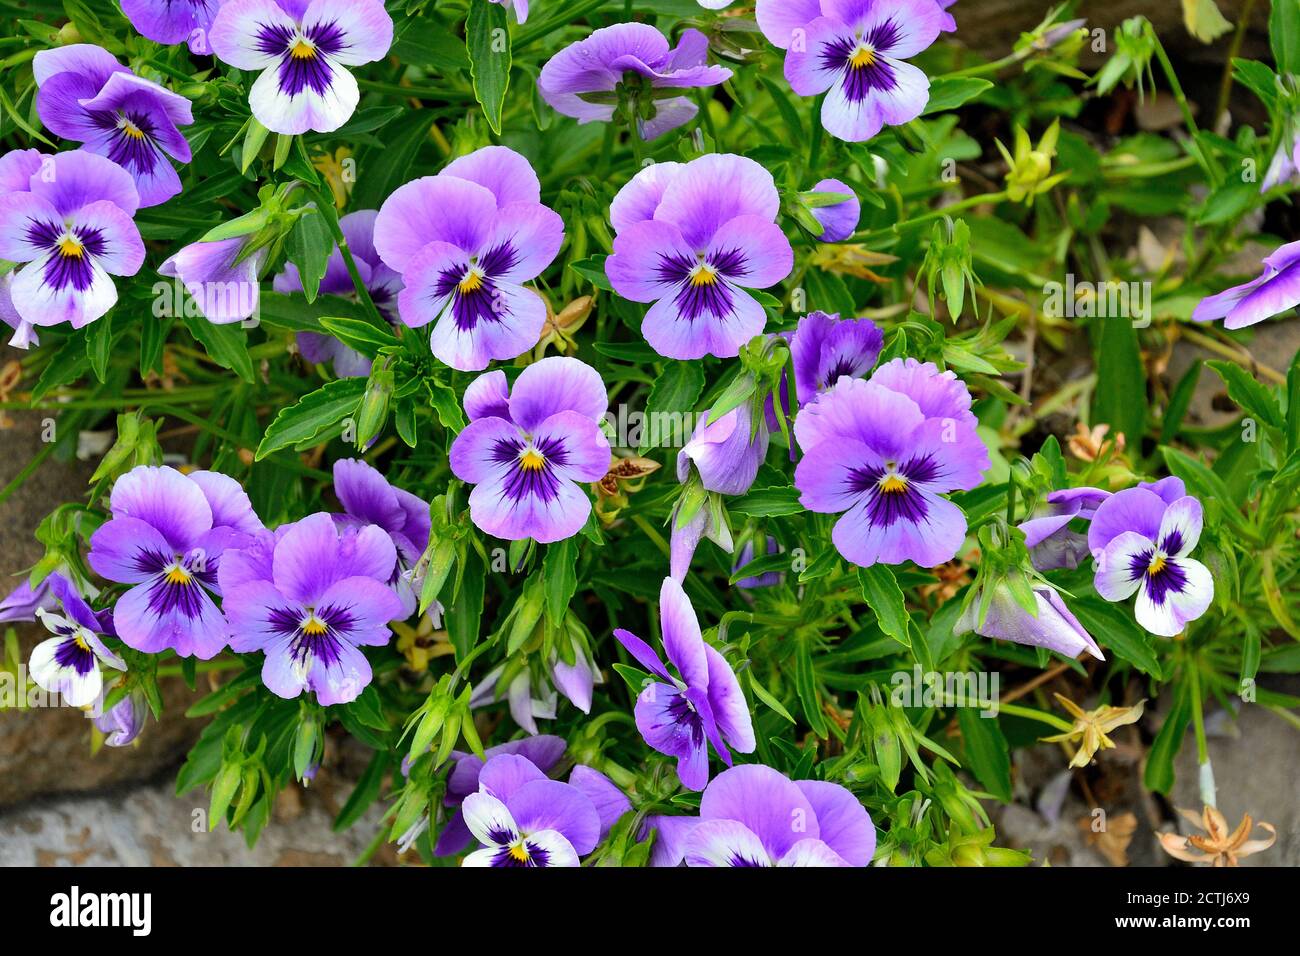 Closeup of colorful pansy flowers in the garden. Scientific name of garden pansies is Viola wittrockiana. Ornamental hybrid plant with violet petals b Stock Photo